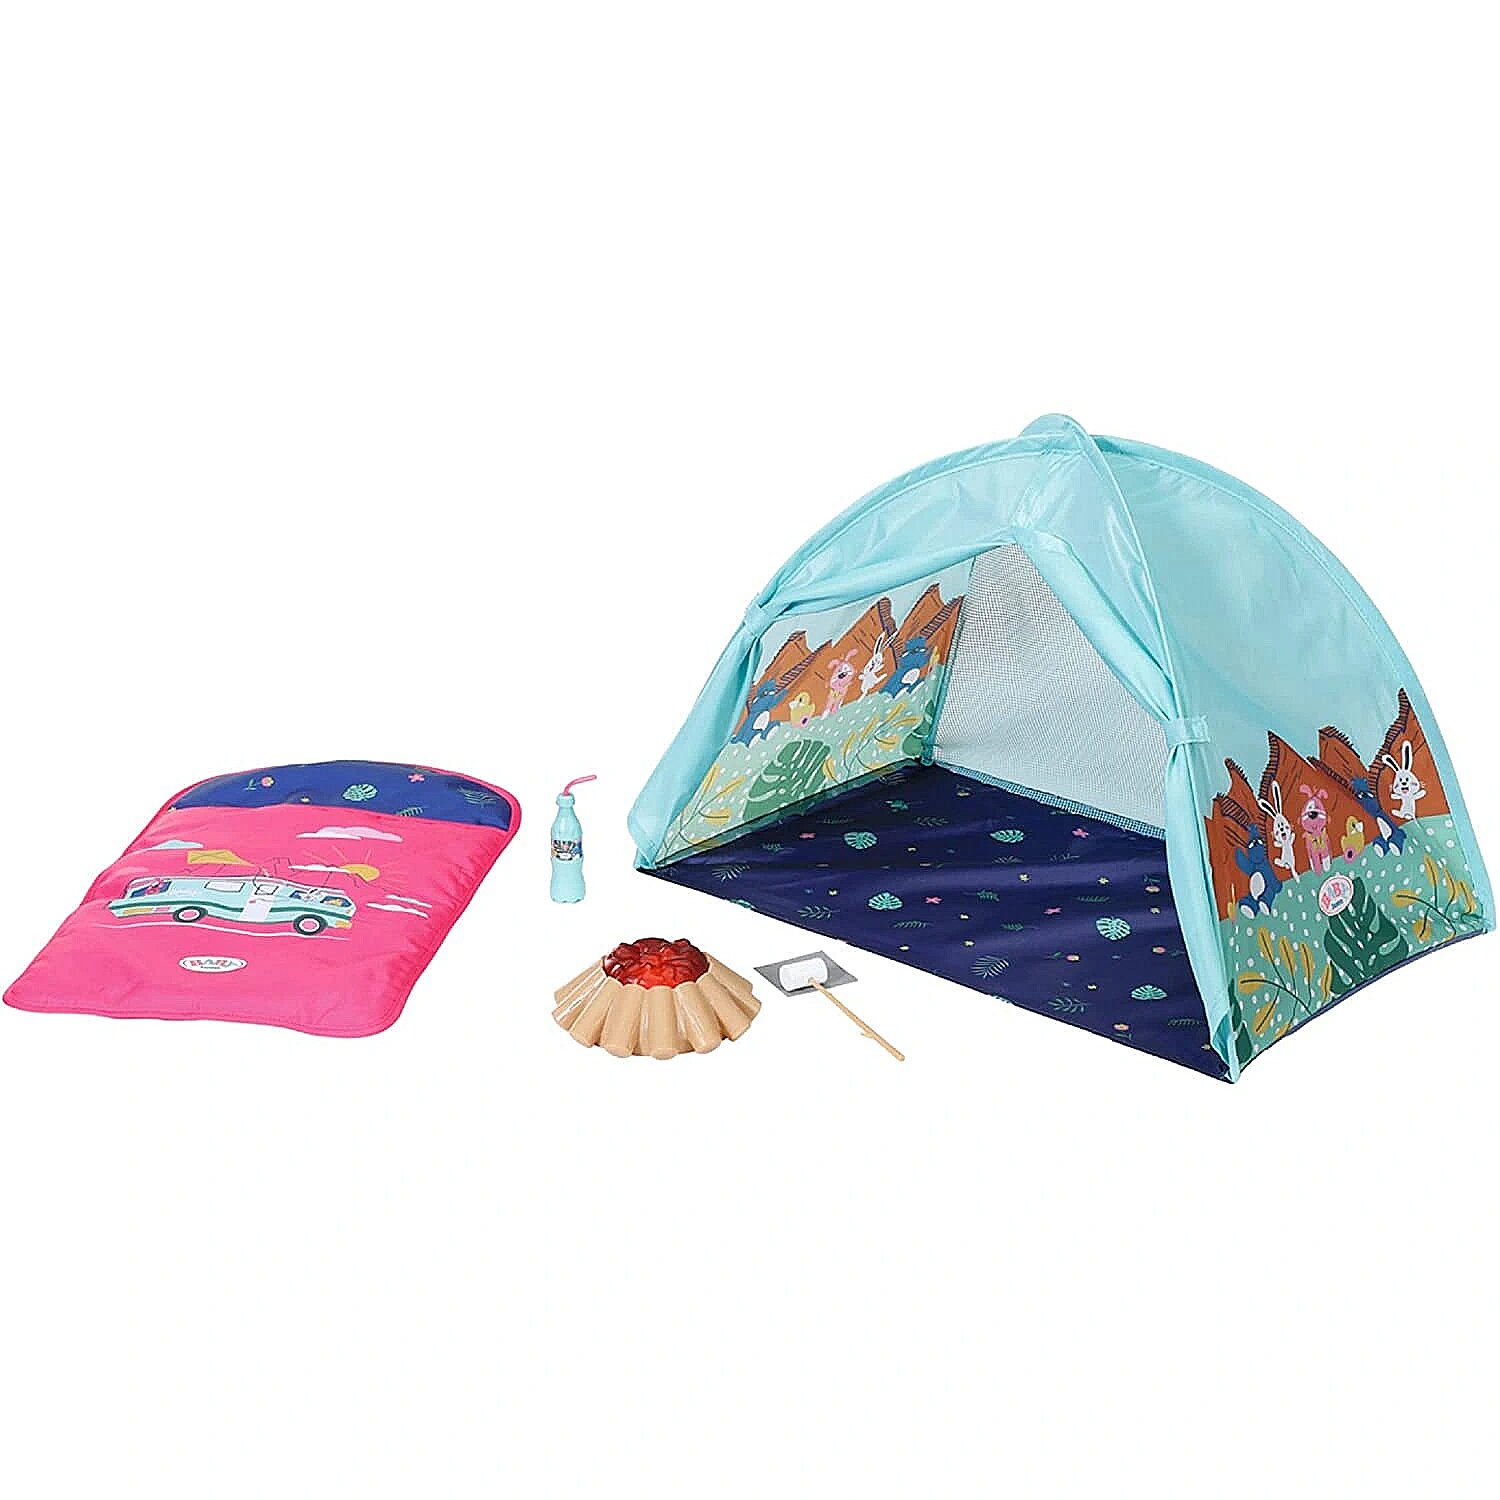 Zapf Creation BABY born Weekend Camping Set, doll accessories